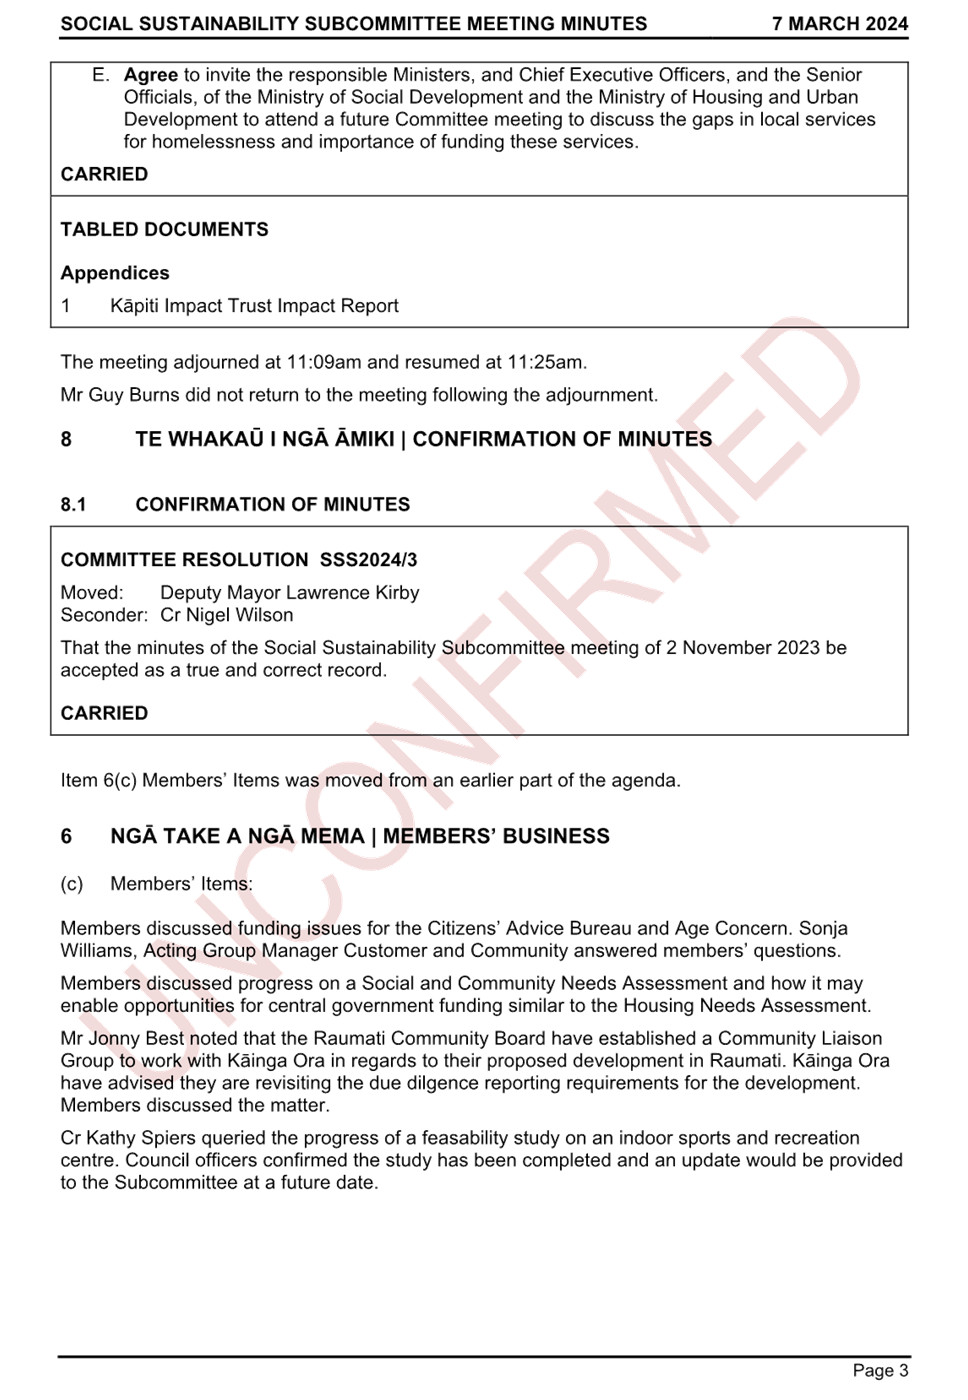 A document with text and a red text

Description automatically generated